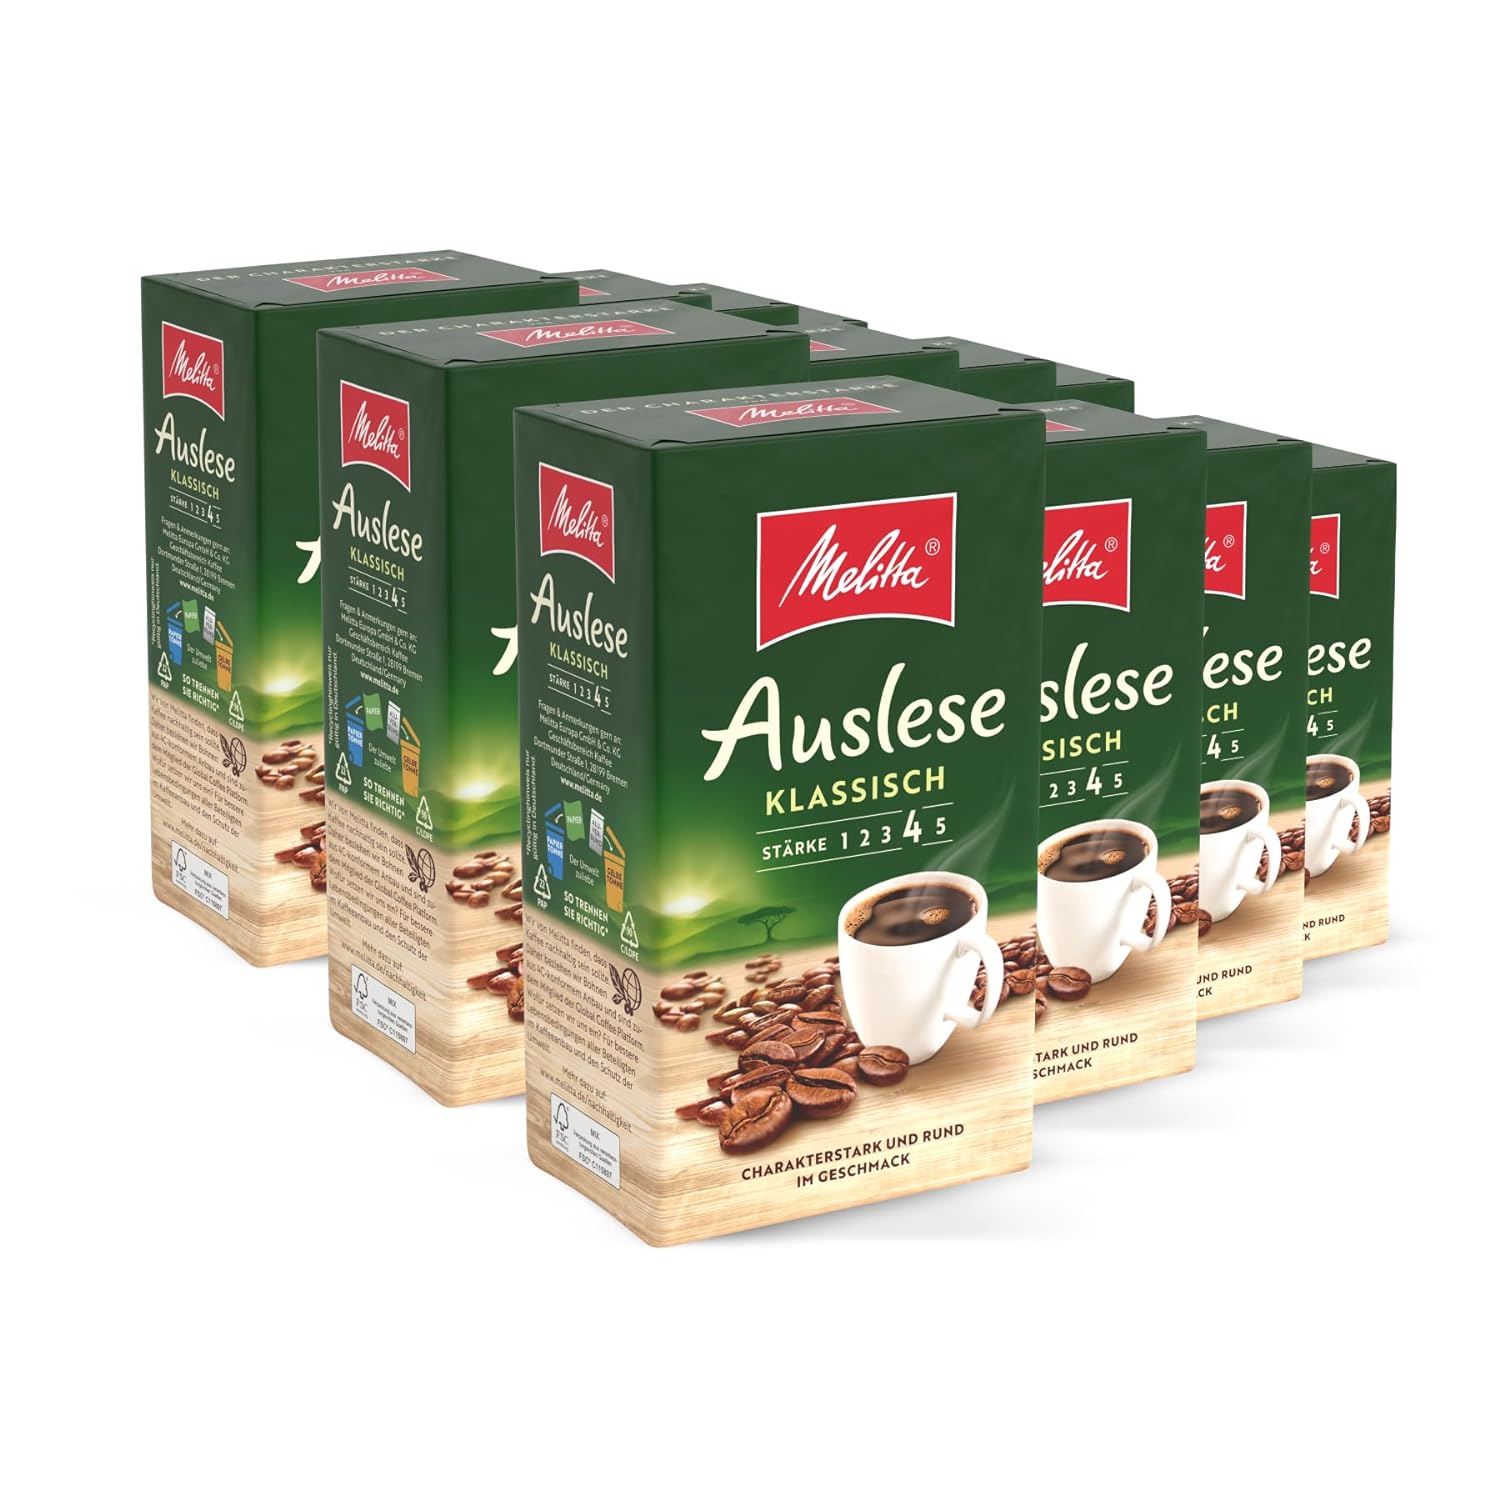 Melitta Auslese Filter Coffee 12 x 500 g, Ground, Powder for Filter Coffee Machines, Strong Roasting, Roasted in Germany, in Tray